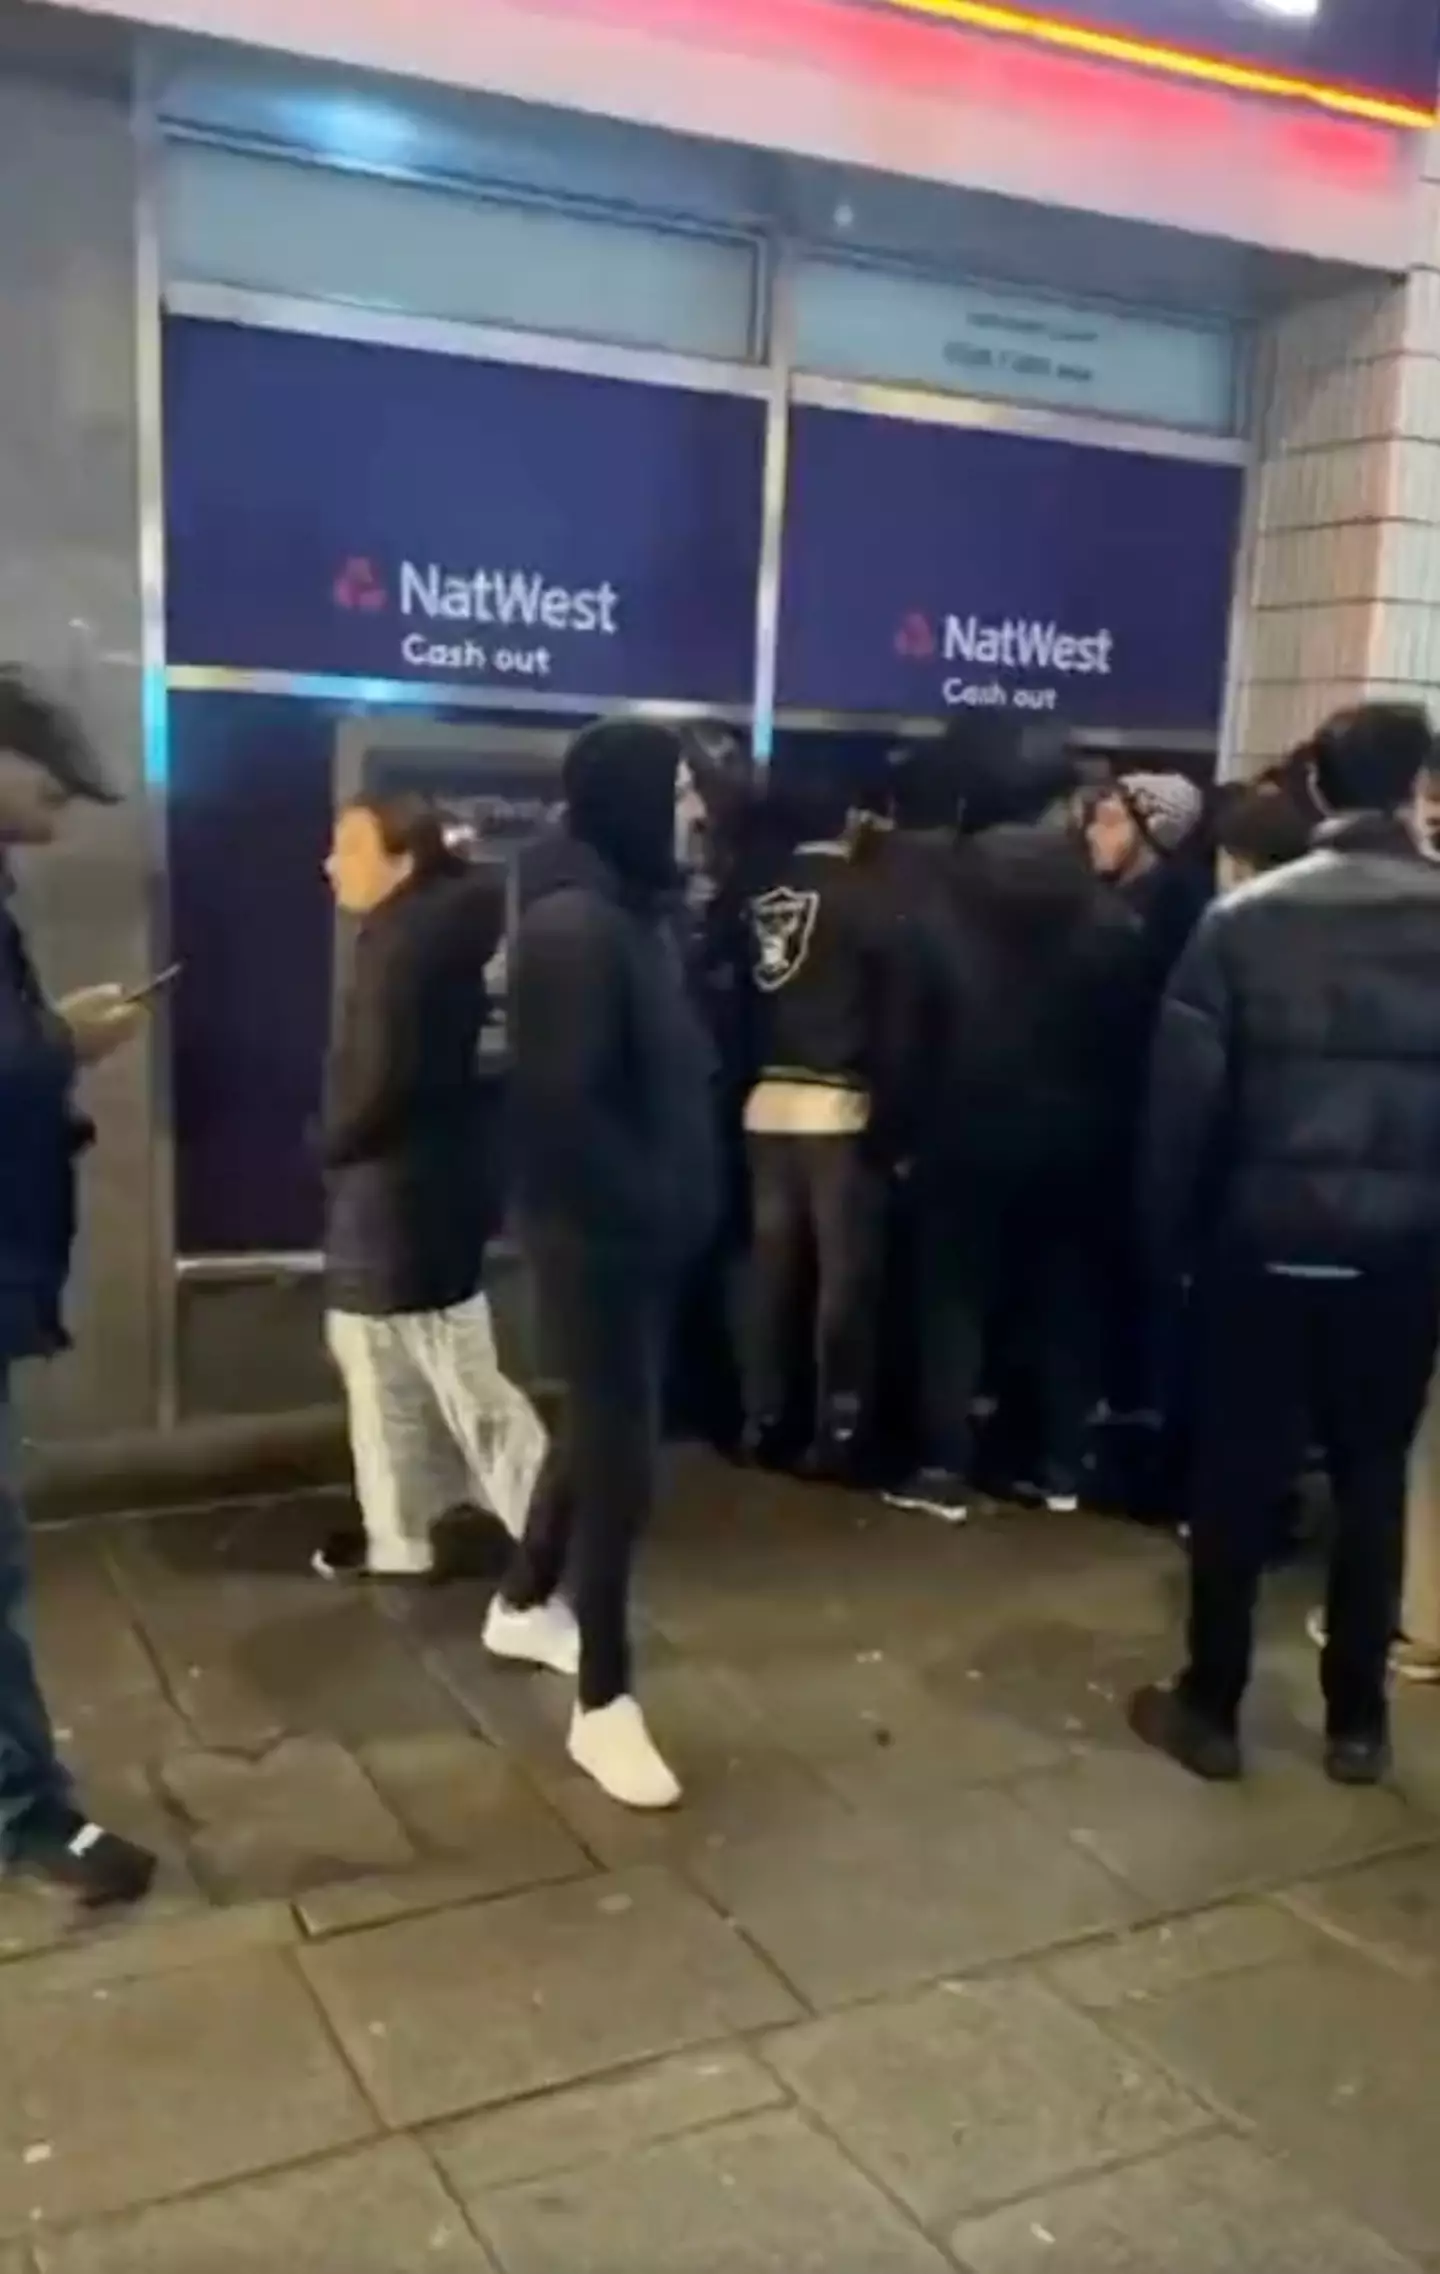 People rushed to the rogue ATM to try and bag some free cash.